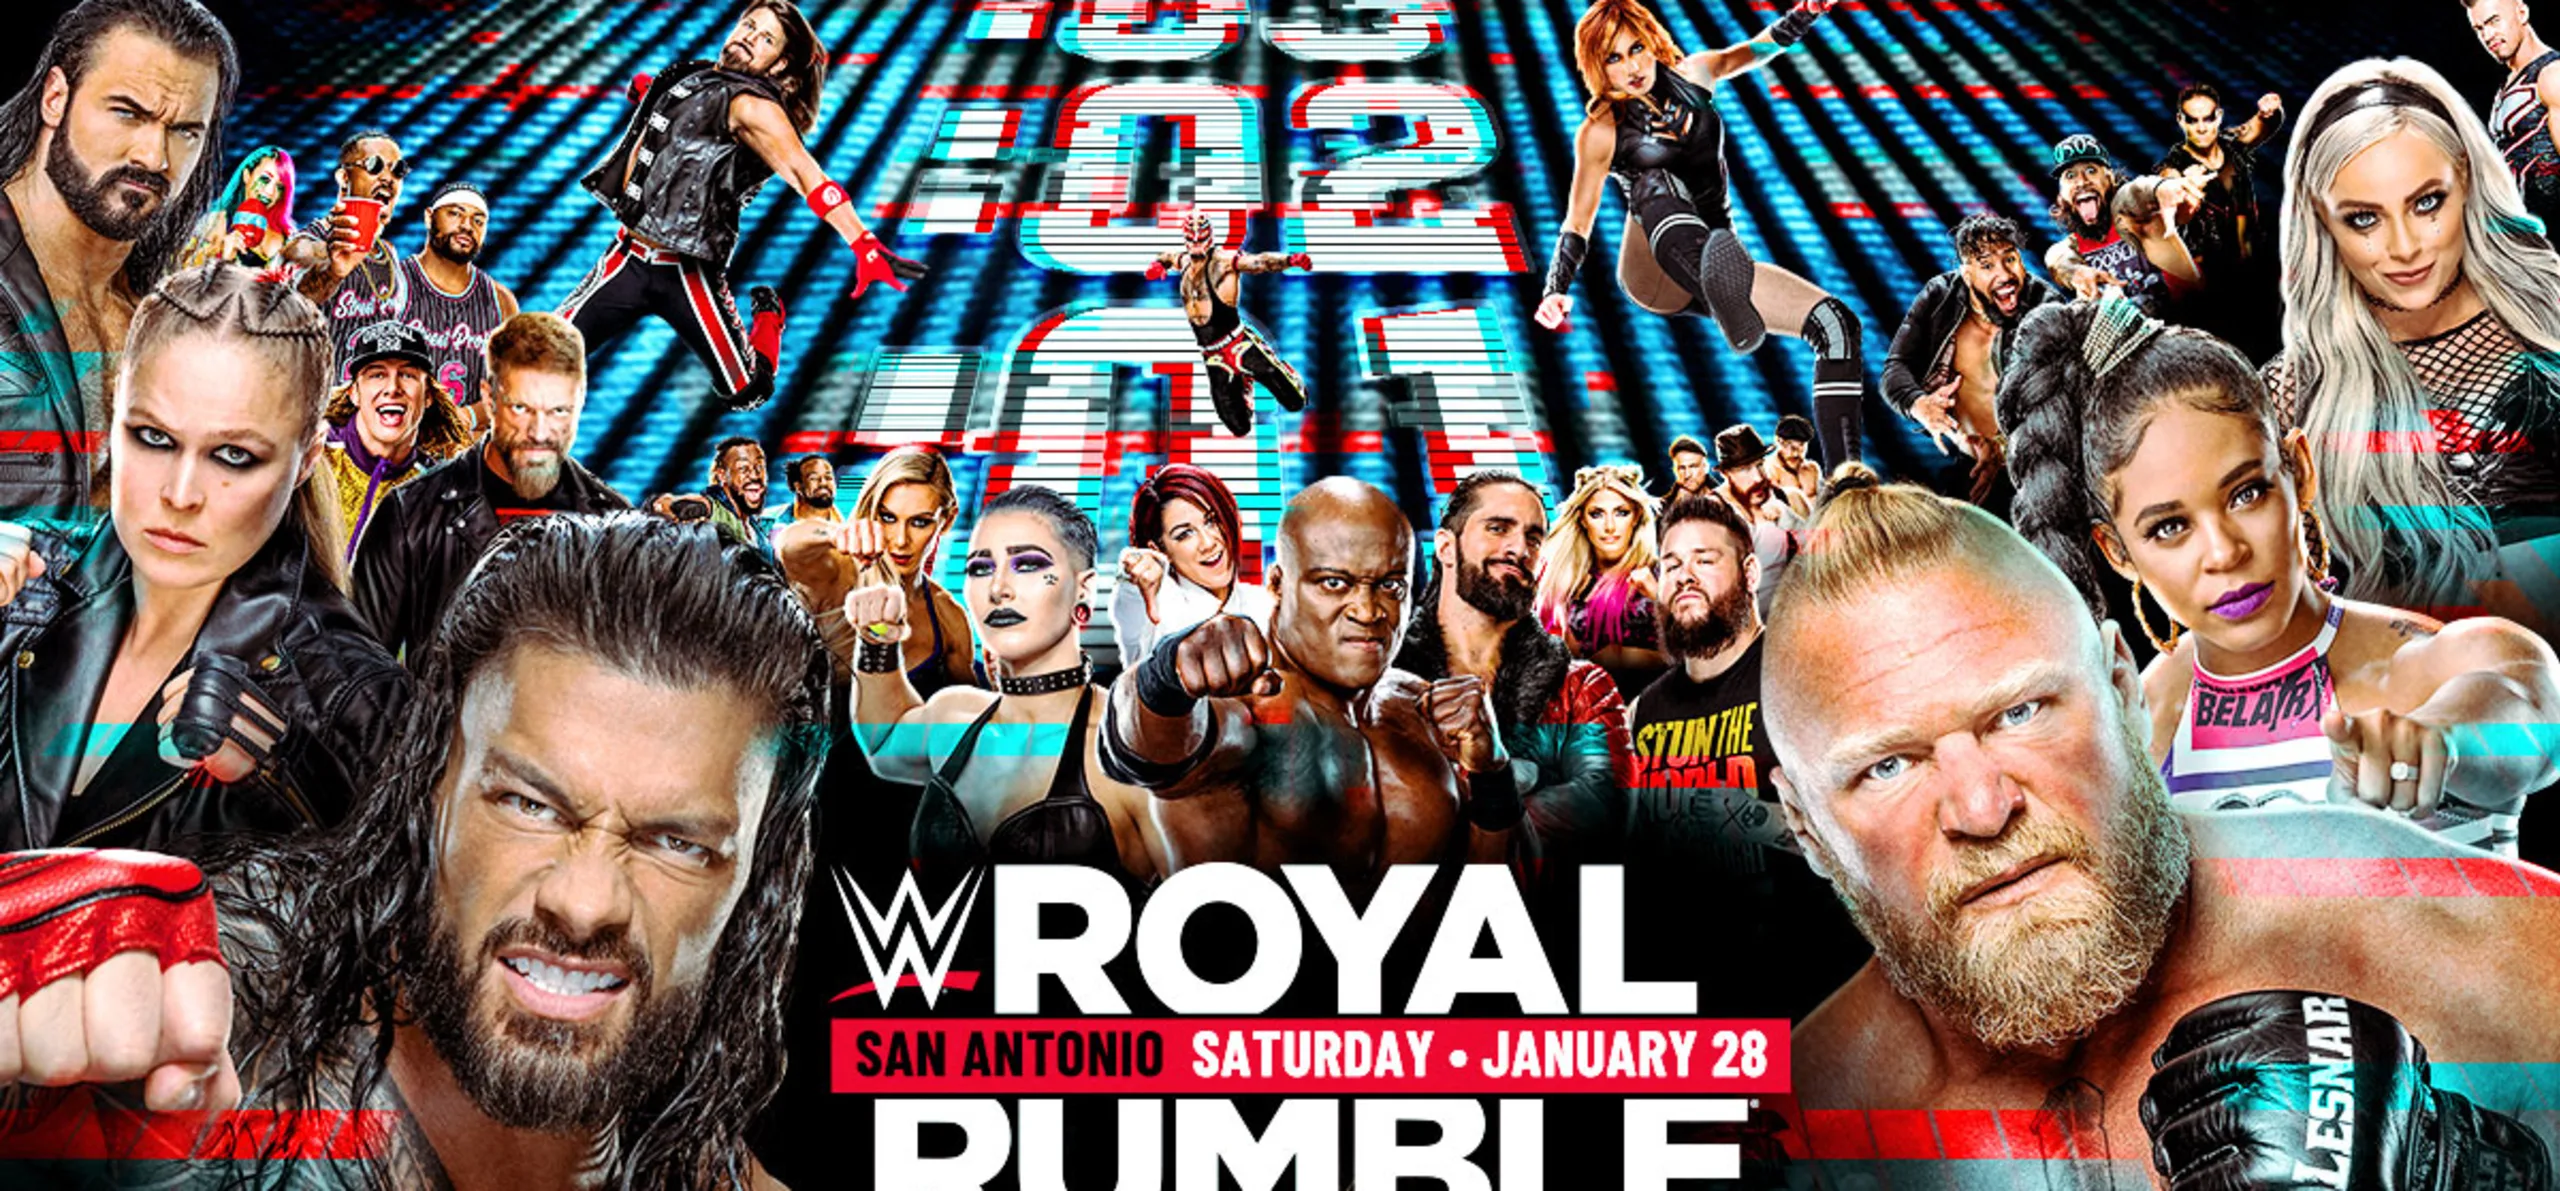 WWE Royal Rumble Spoilers: Updated Betting Odds For Women's Rumble Match